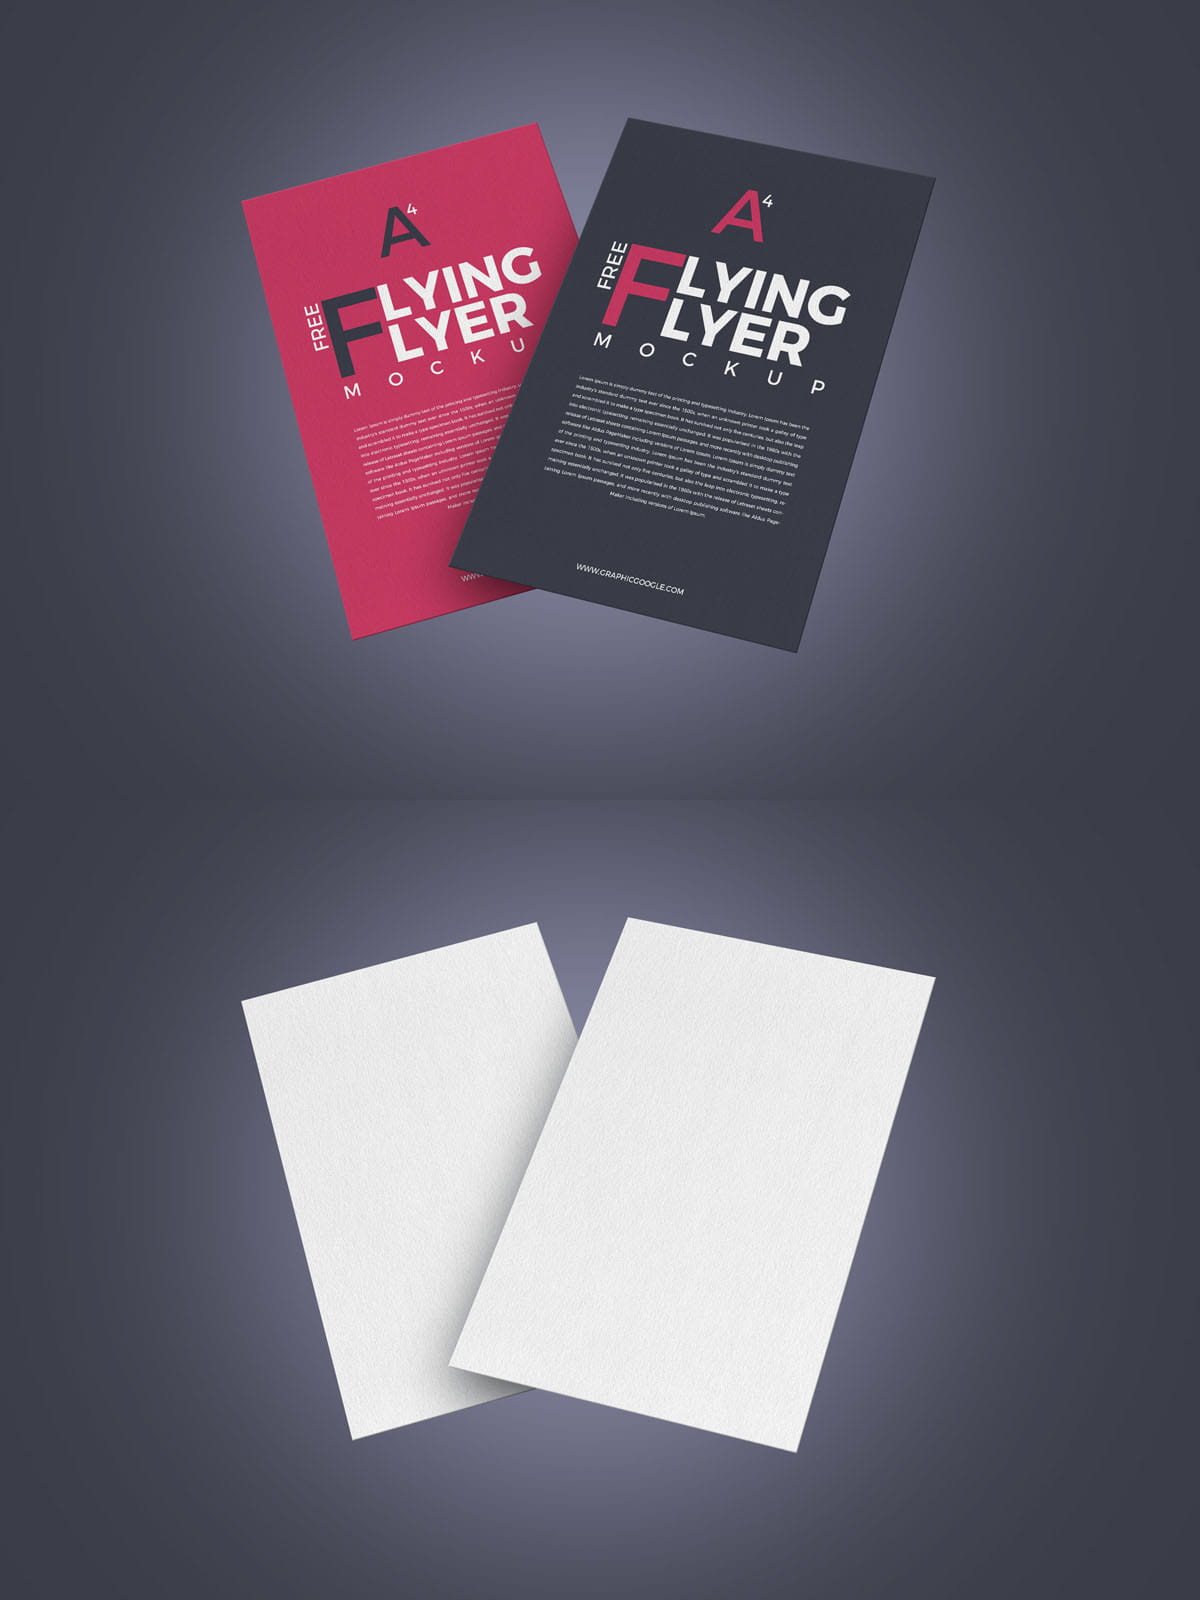 Download Free 2 Flying Flyer PSD Mockup - Find the Perfect Creative Mockups Freebies to Showcase your ...